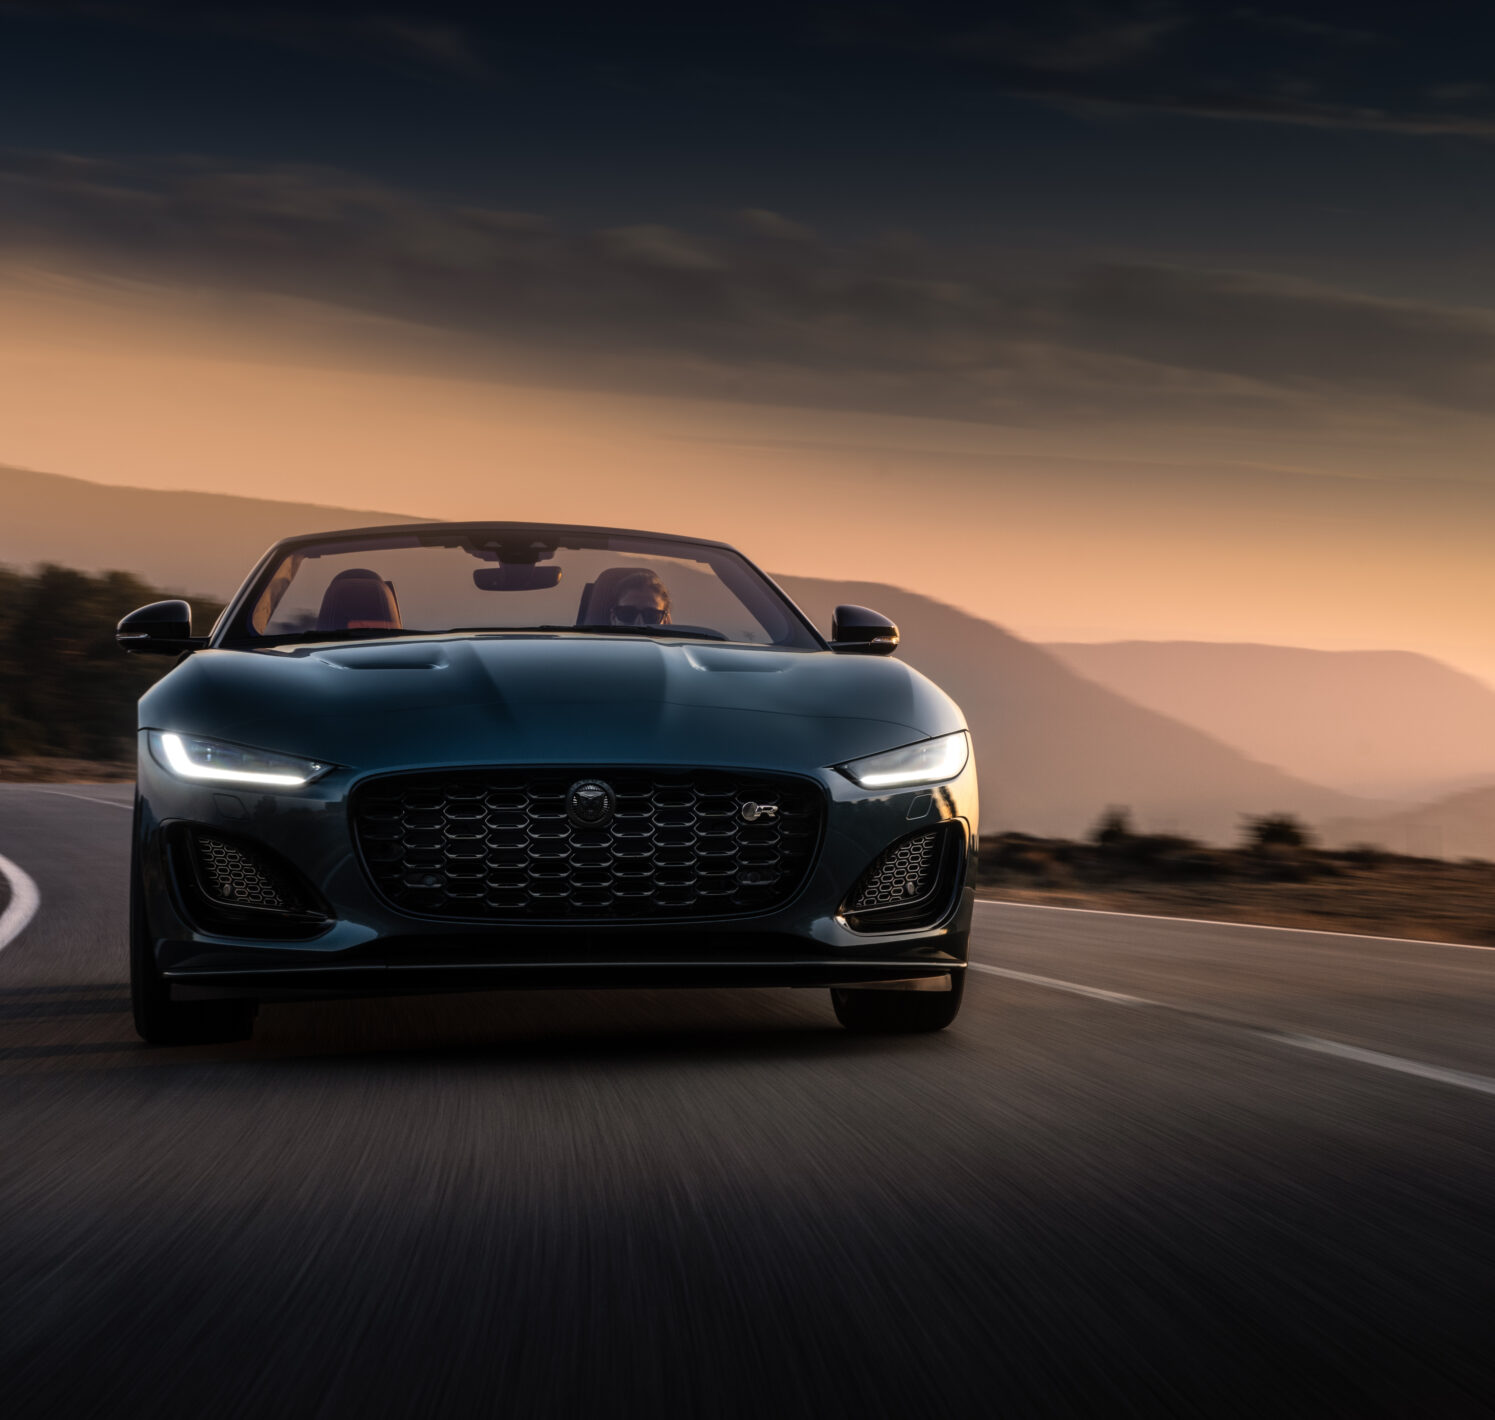 https://autofilter.sk/assets/images/f-type/gallery/Jag_F-TYPE_24MY_Conv_Exterior_Driving_Front_Dusk_March_2023_MF102056.jpg - obrazok